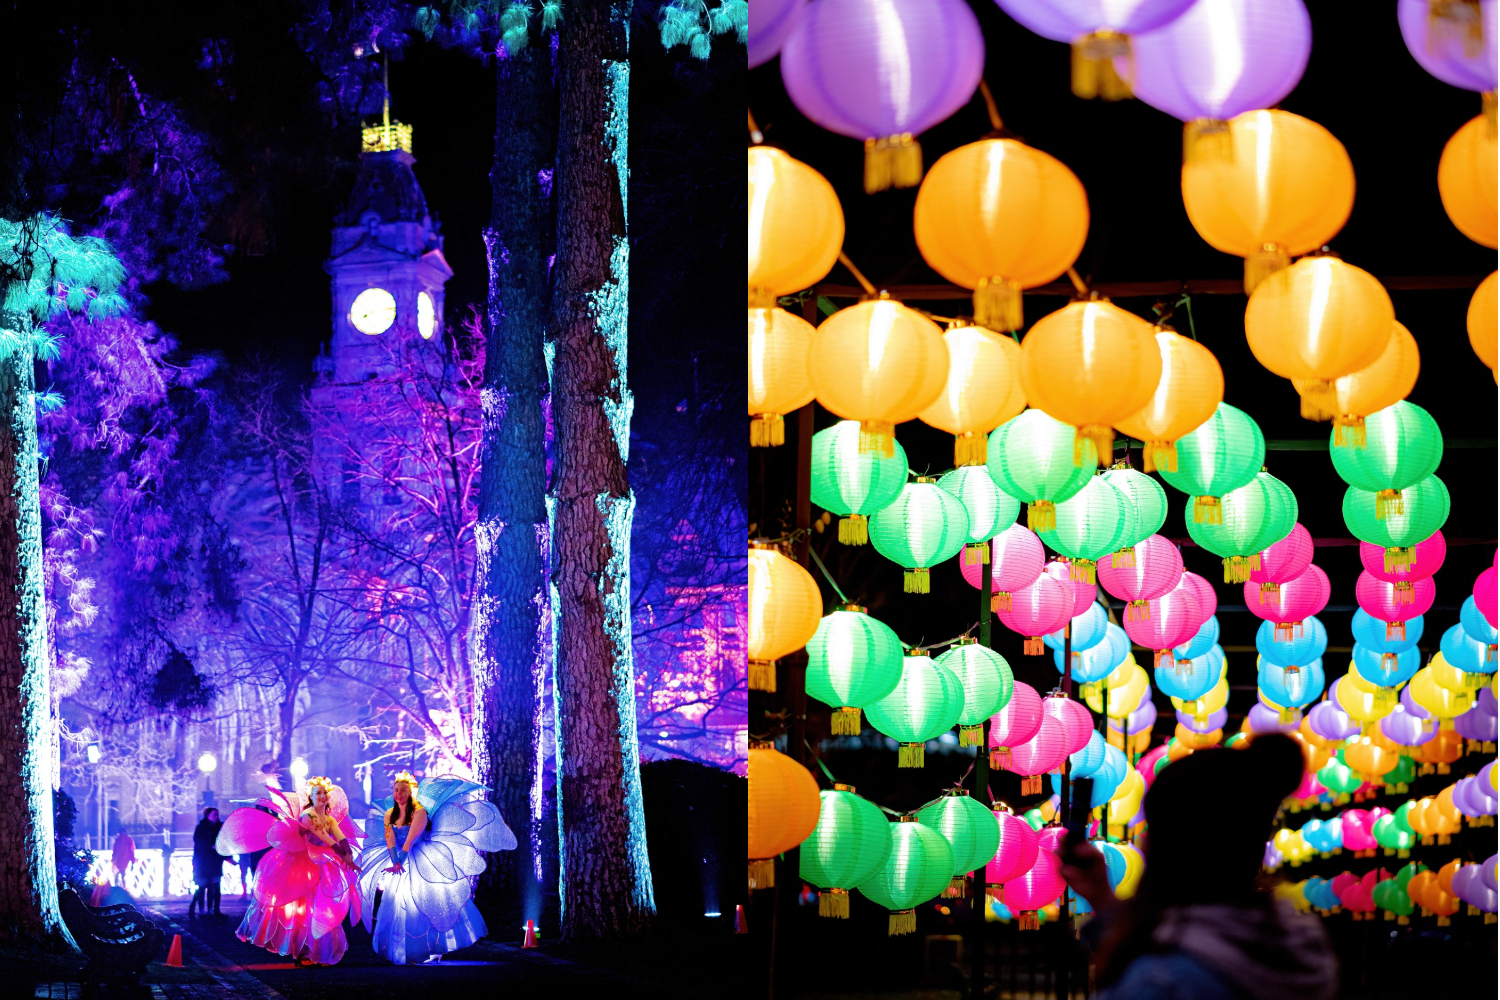 Regional Victoria just scored another magical winter lights festival